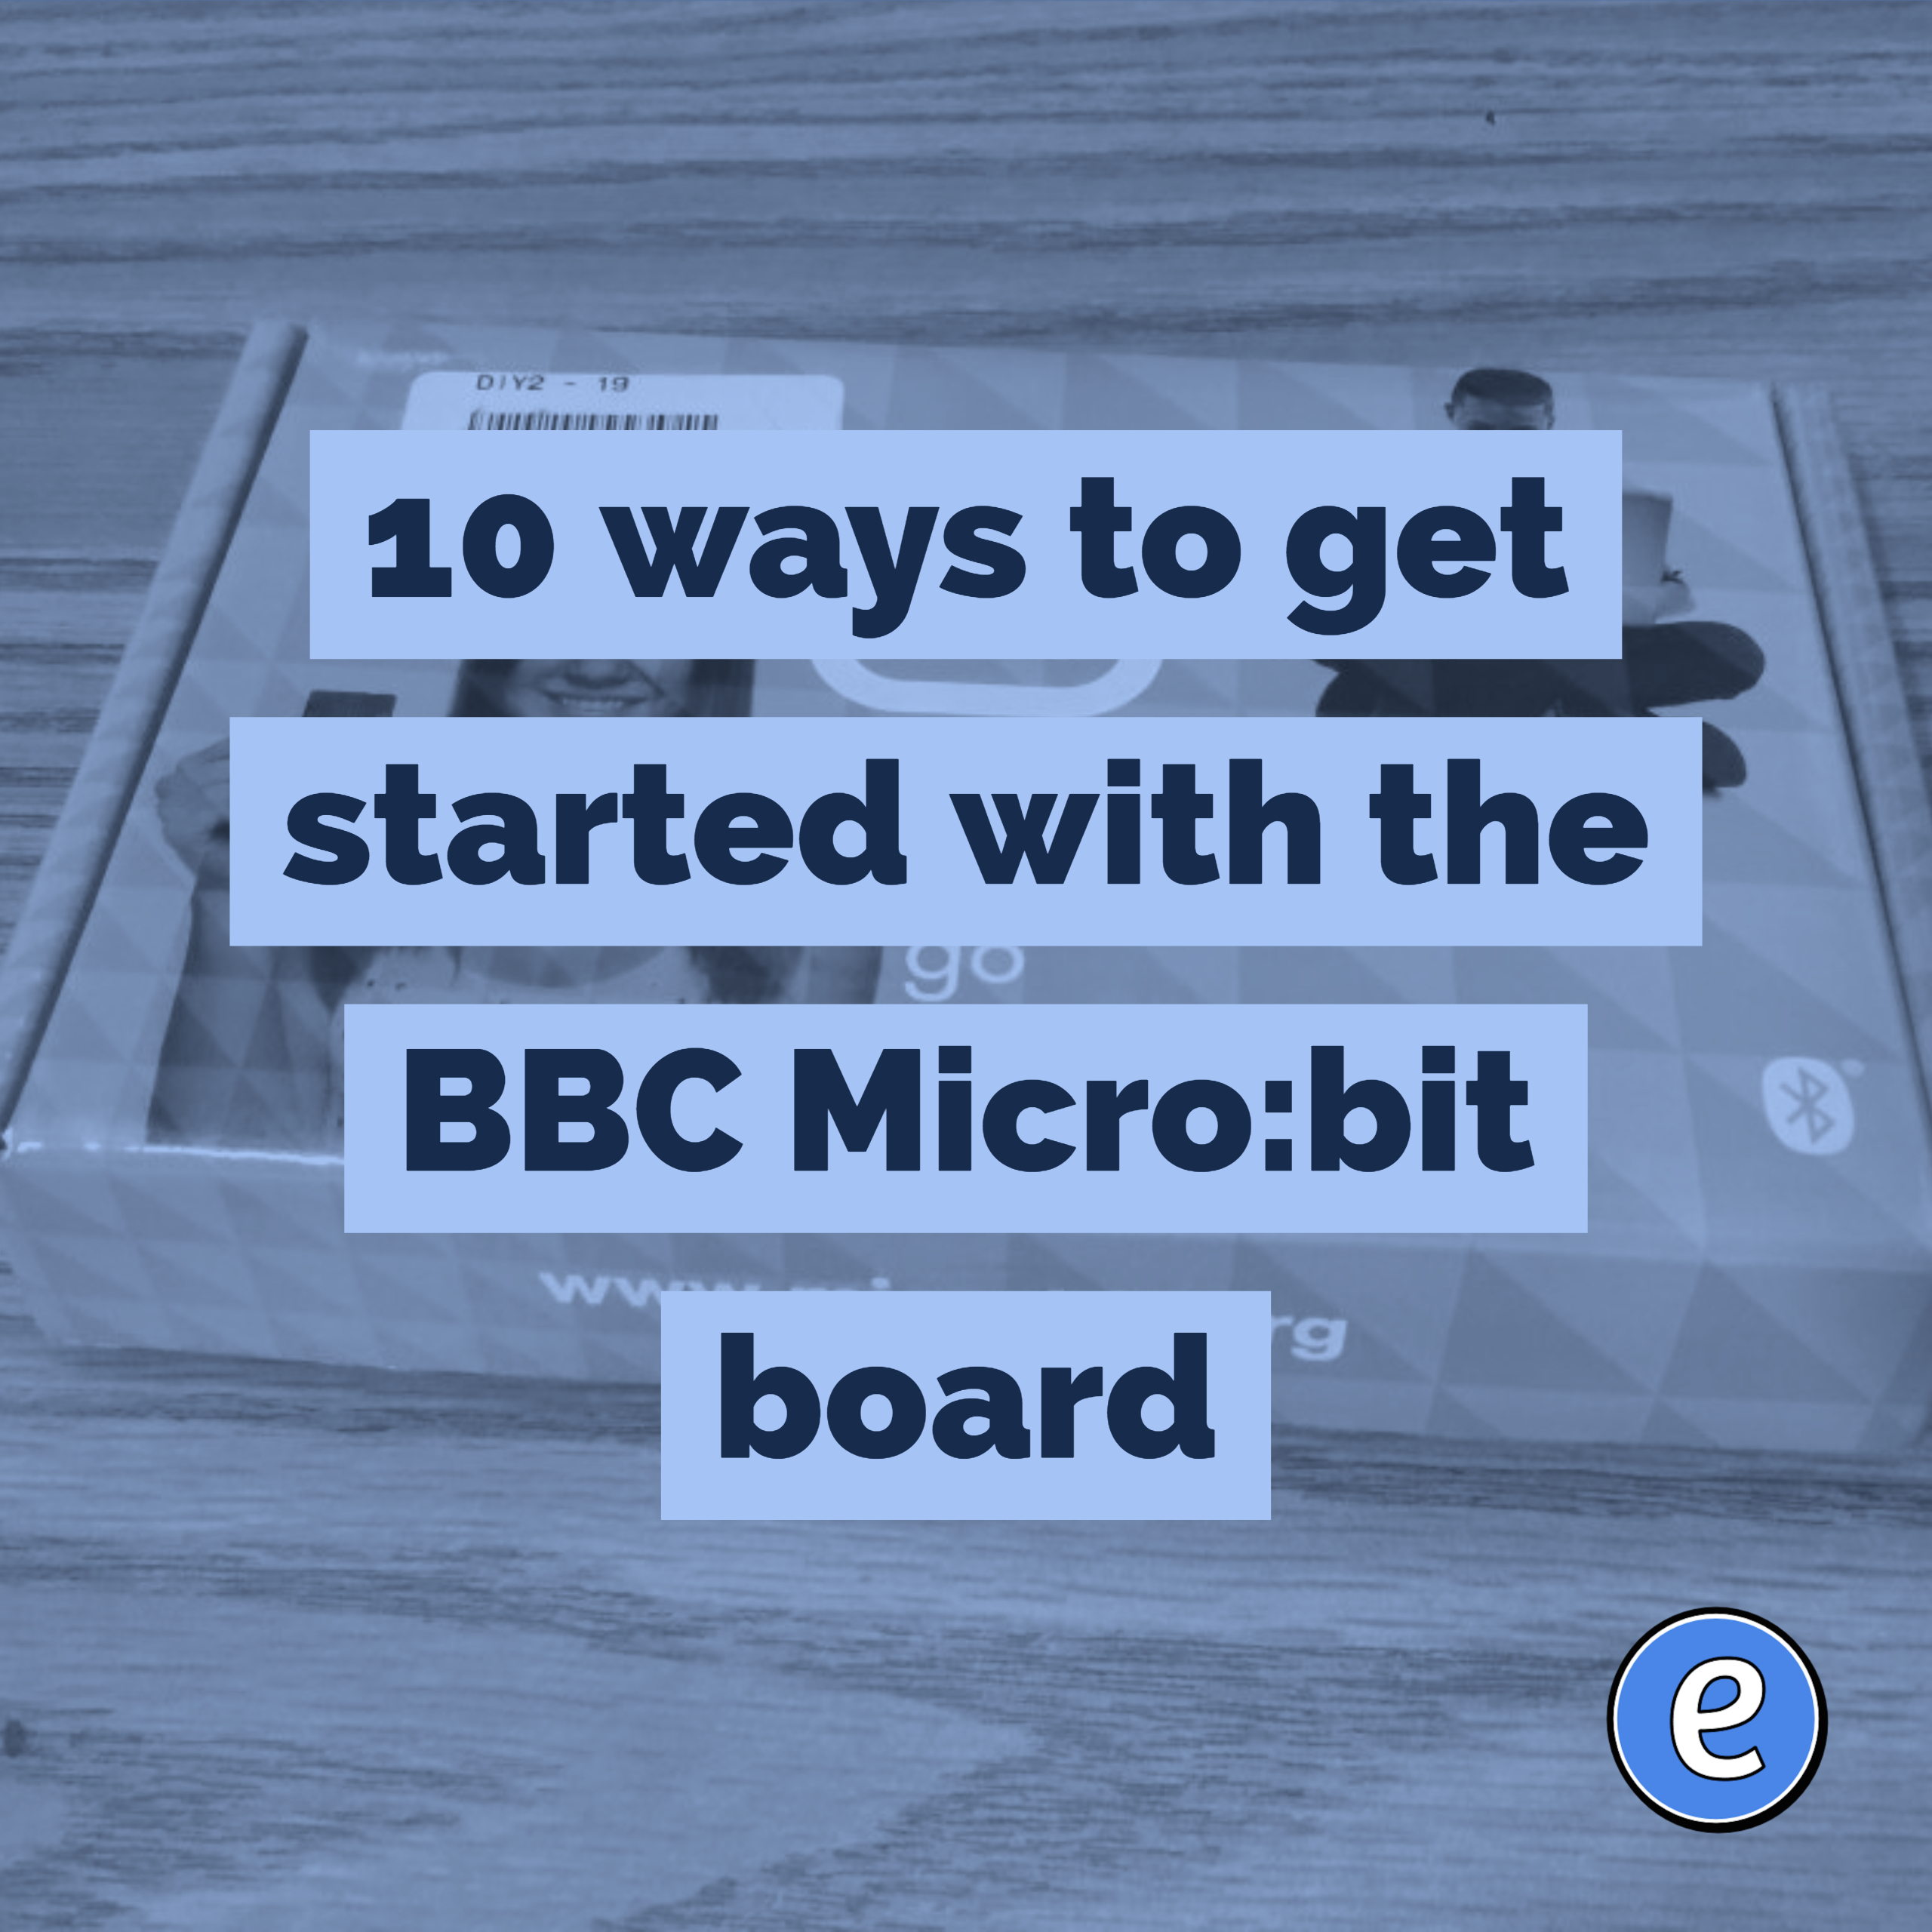 10 ways to get started with the BBC Micro:bit board